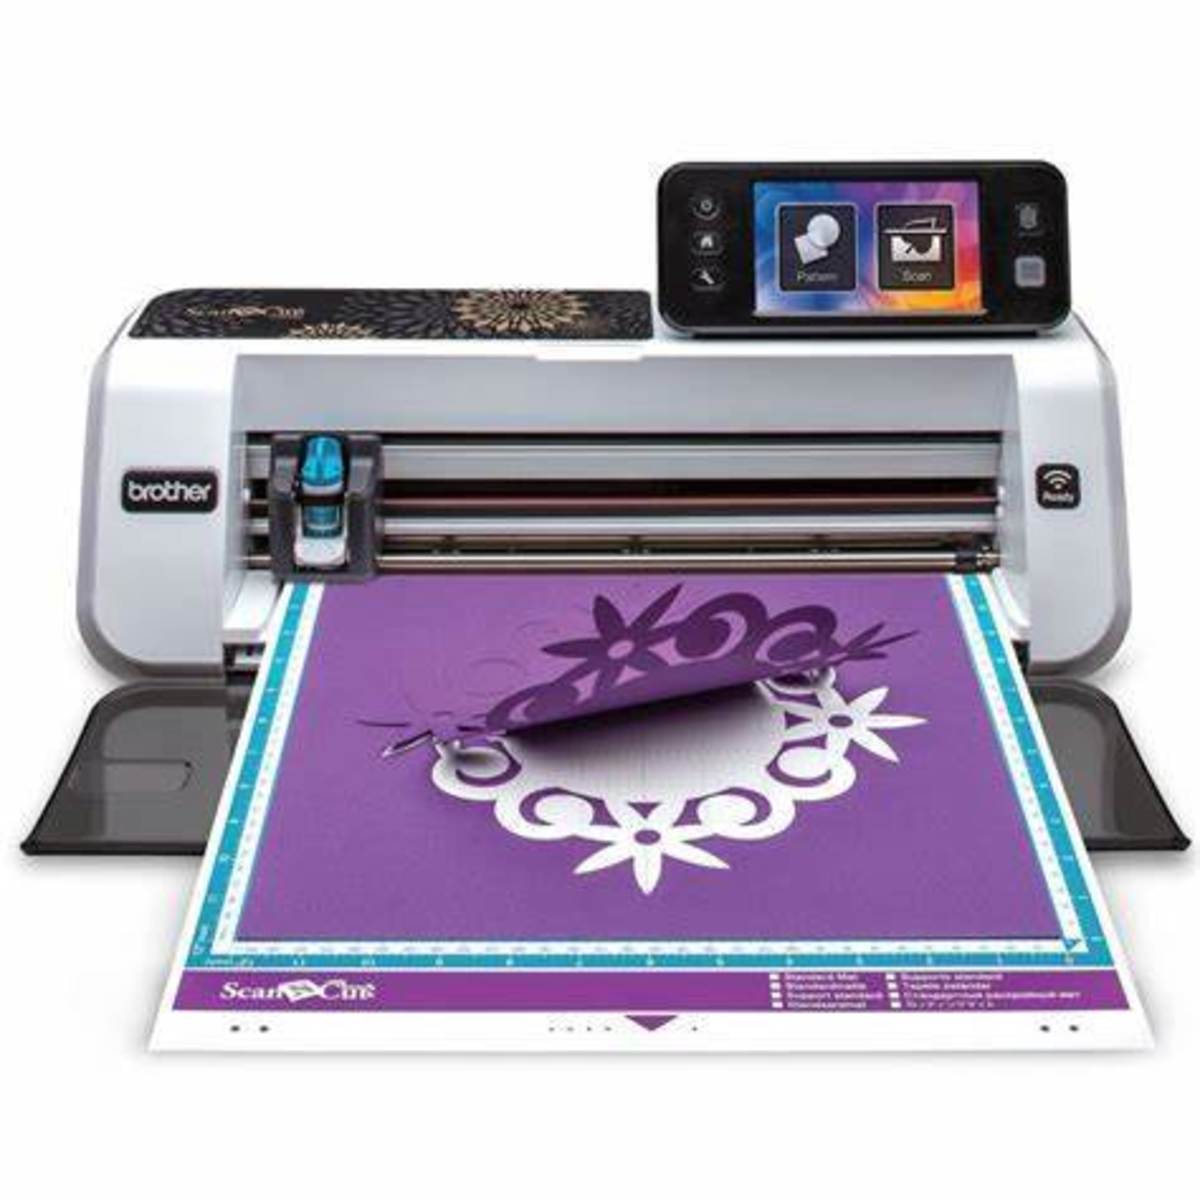 Electronic cutting machines are an alternative that enables you to create custom die cuts